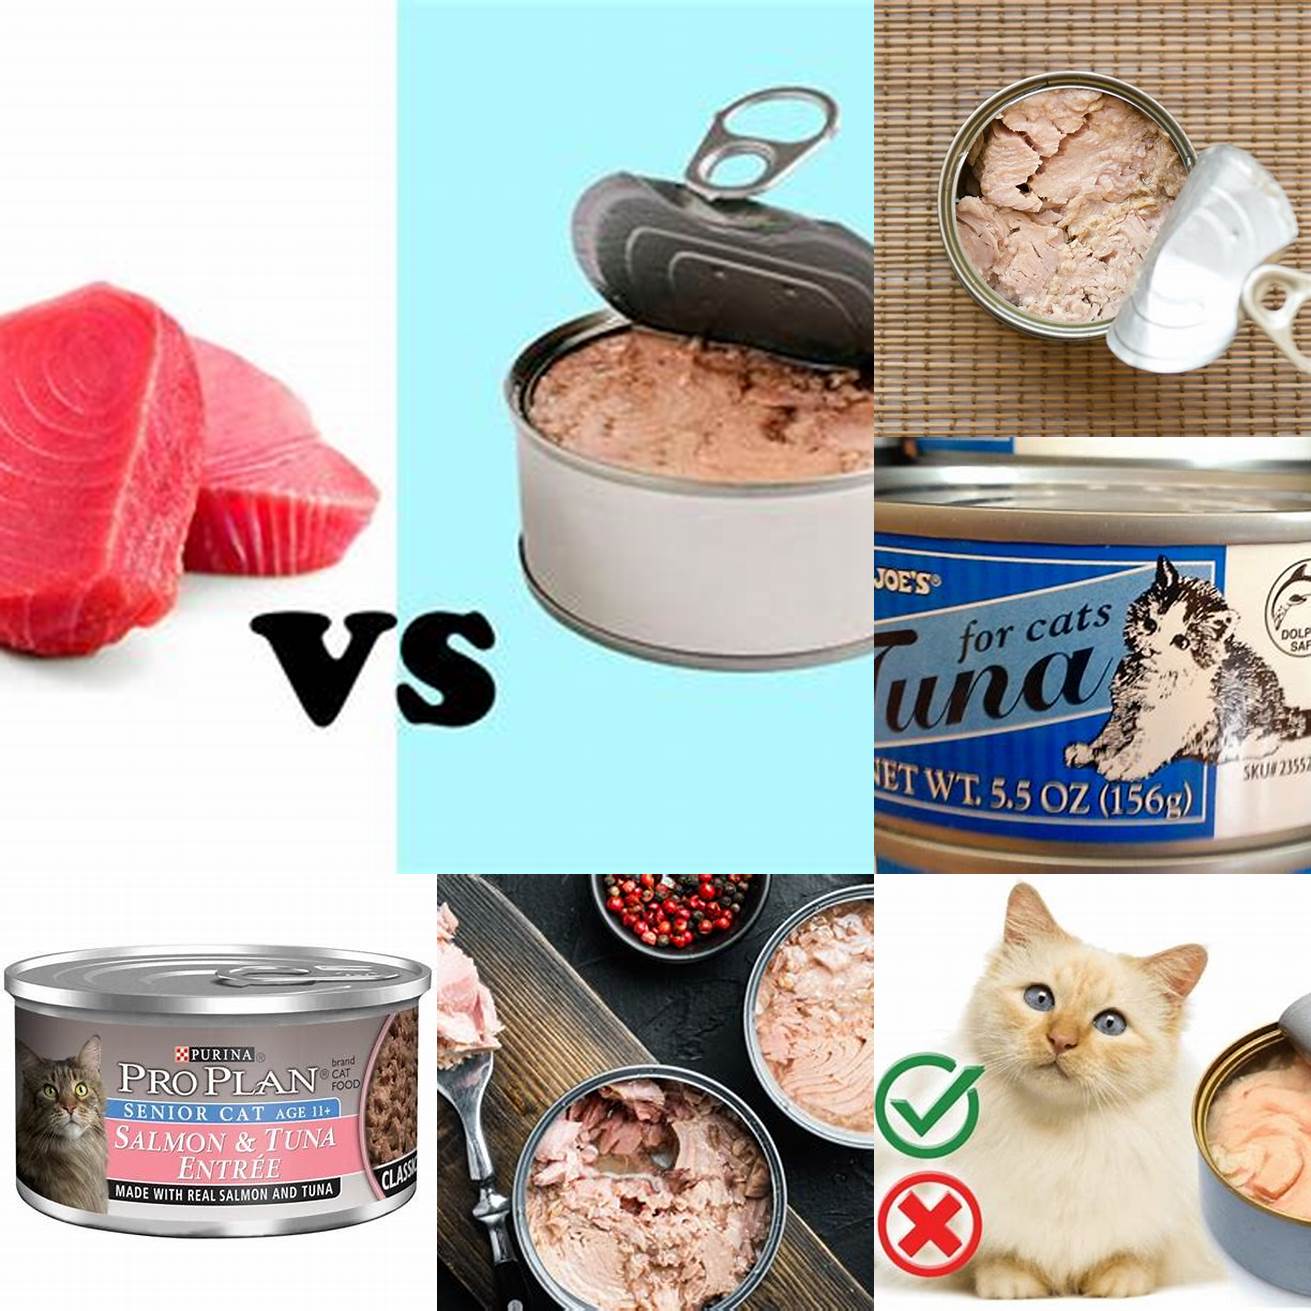 Q Is canned tuna better than fresh tuna for cats